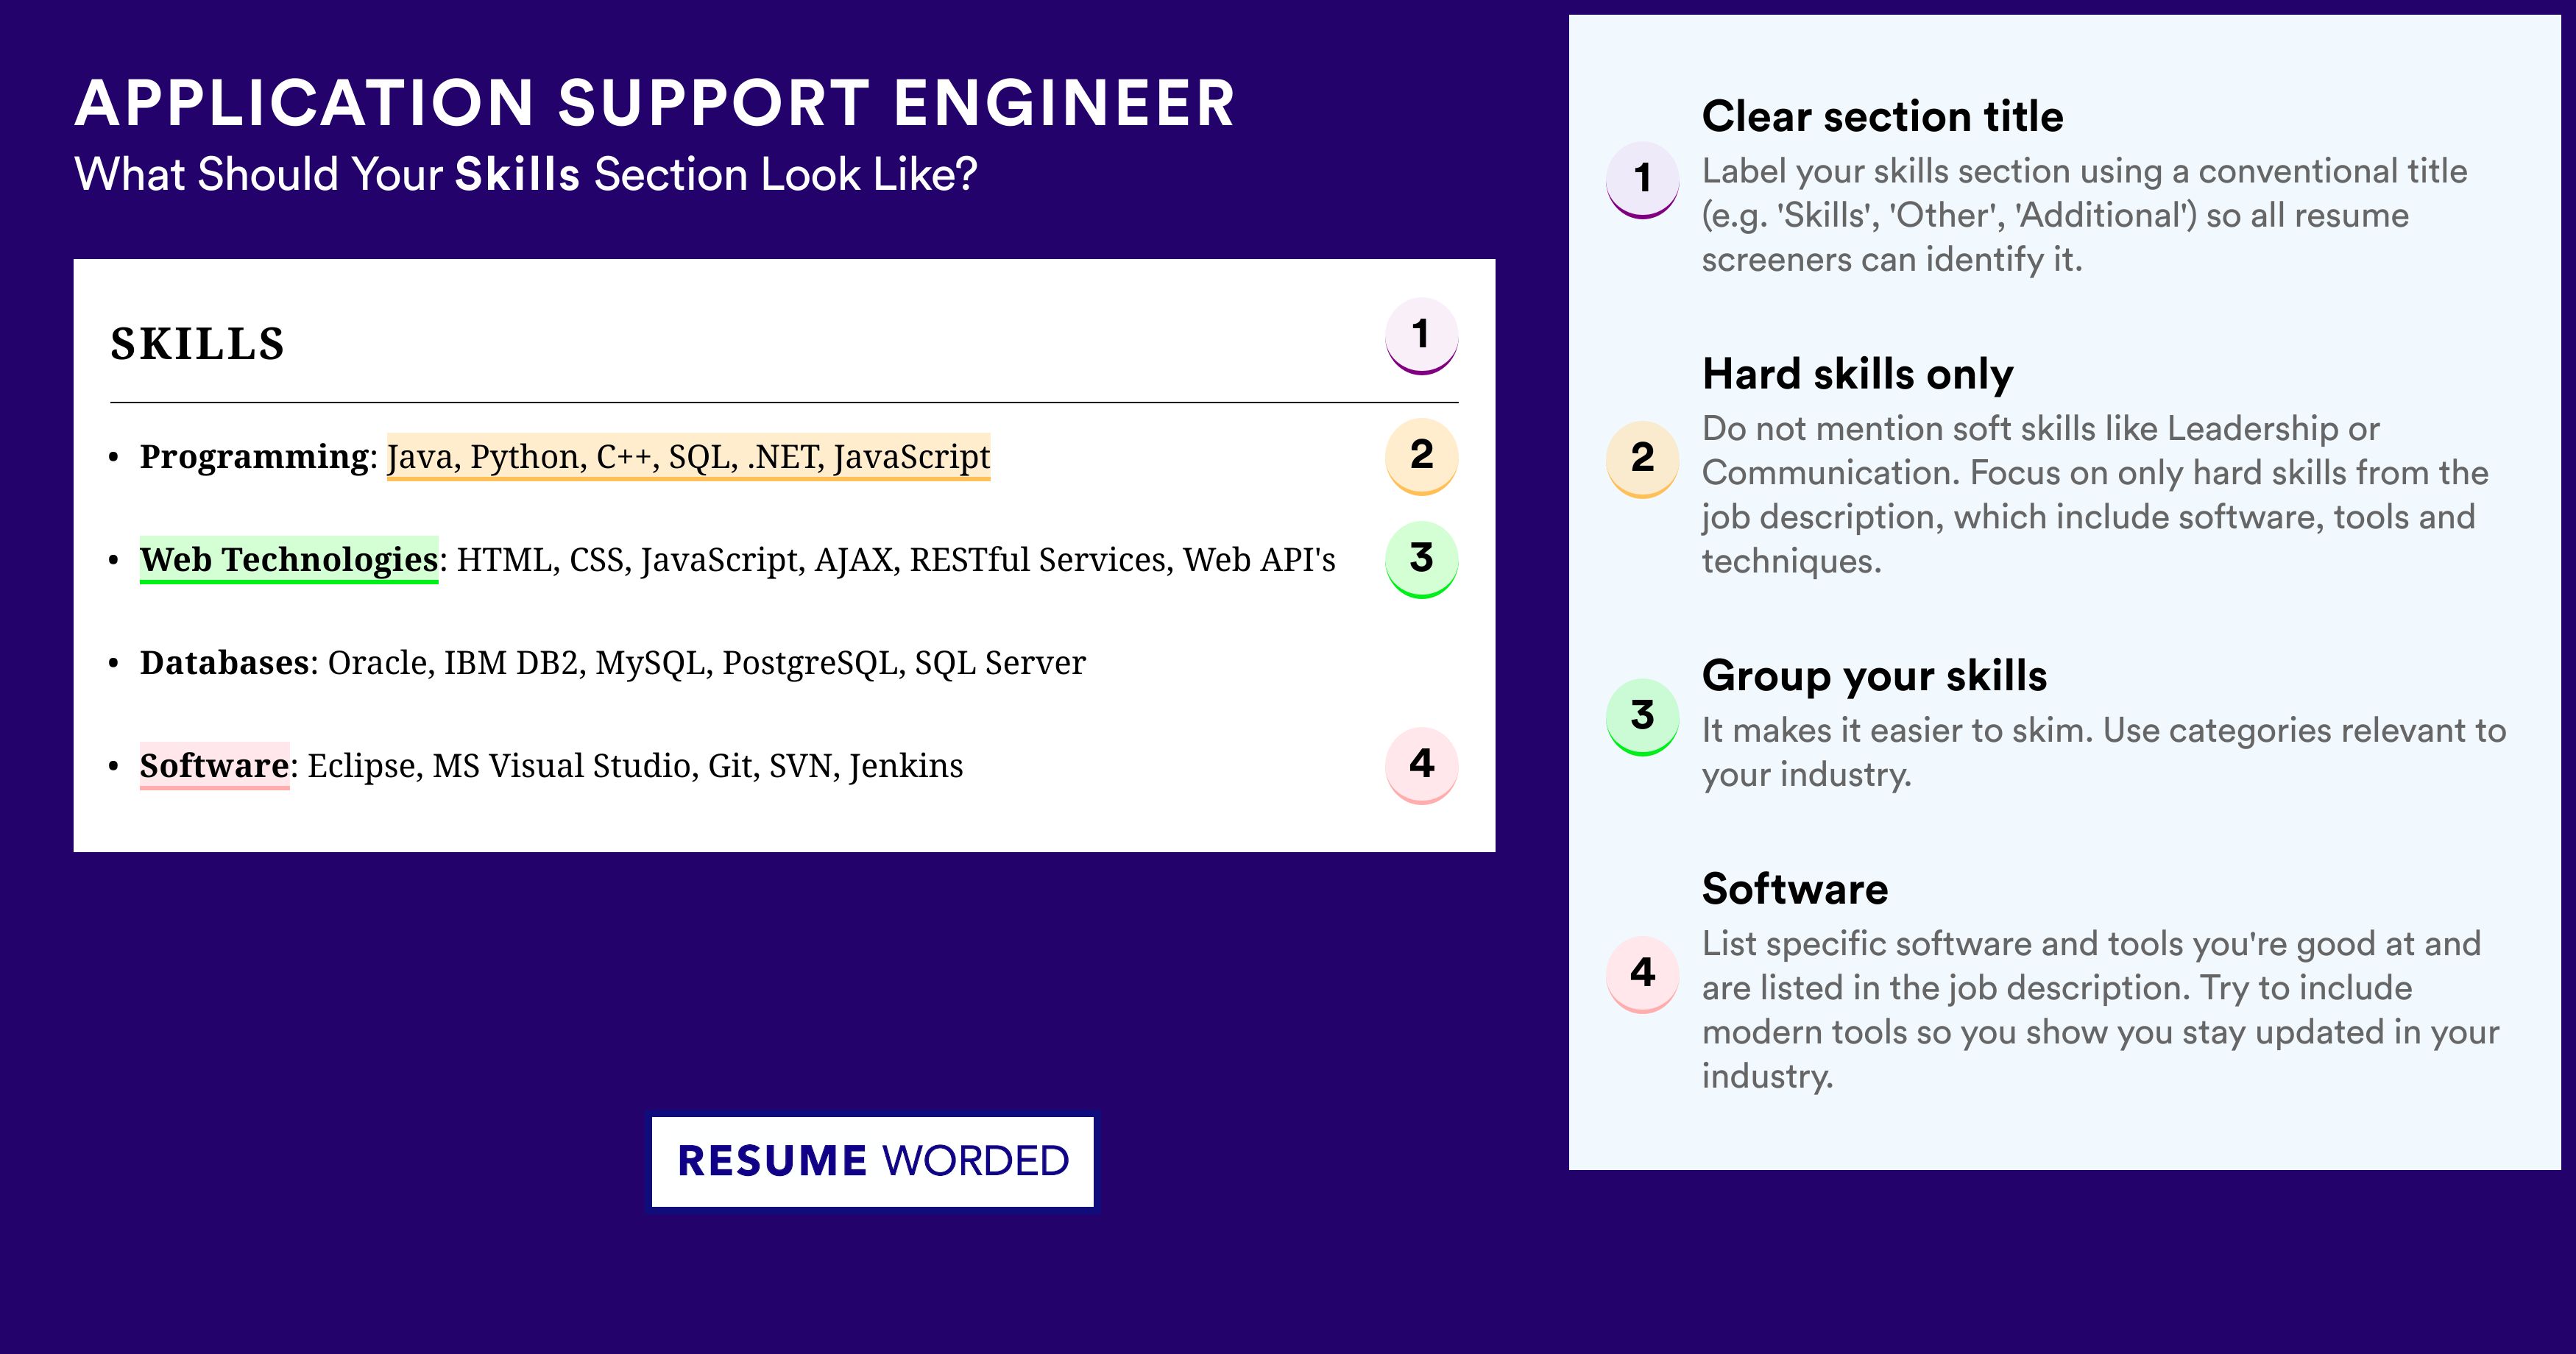 How To Write Your Skills Section - Application Support Engineer Roles